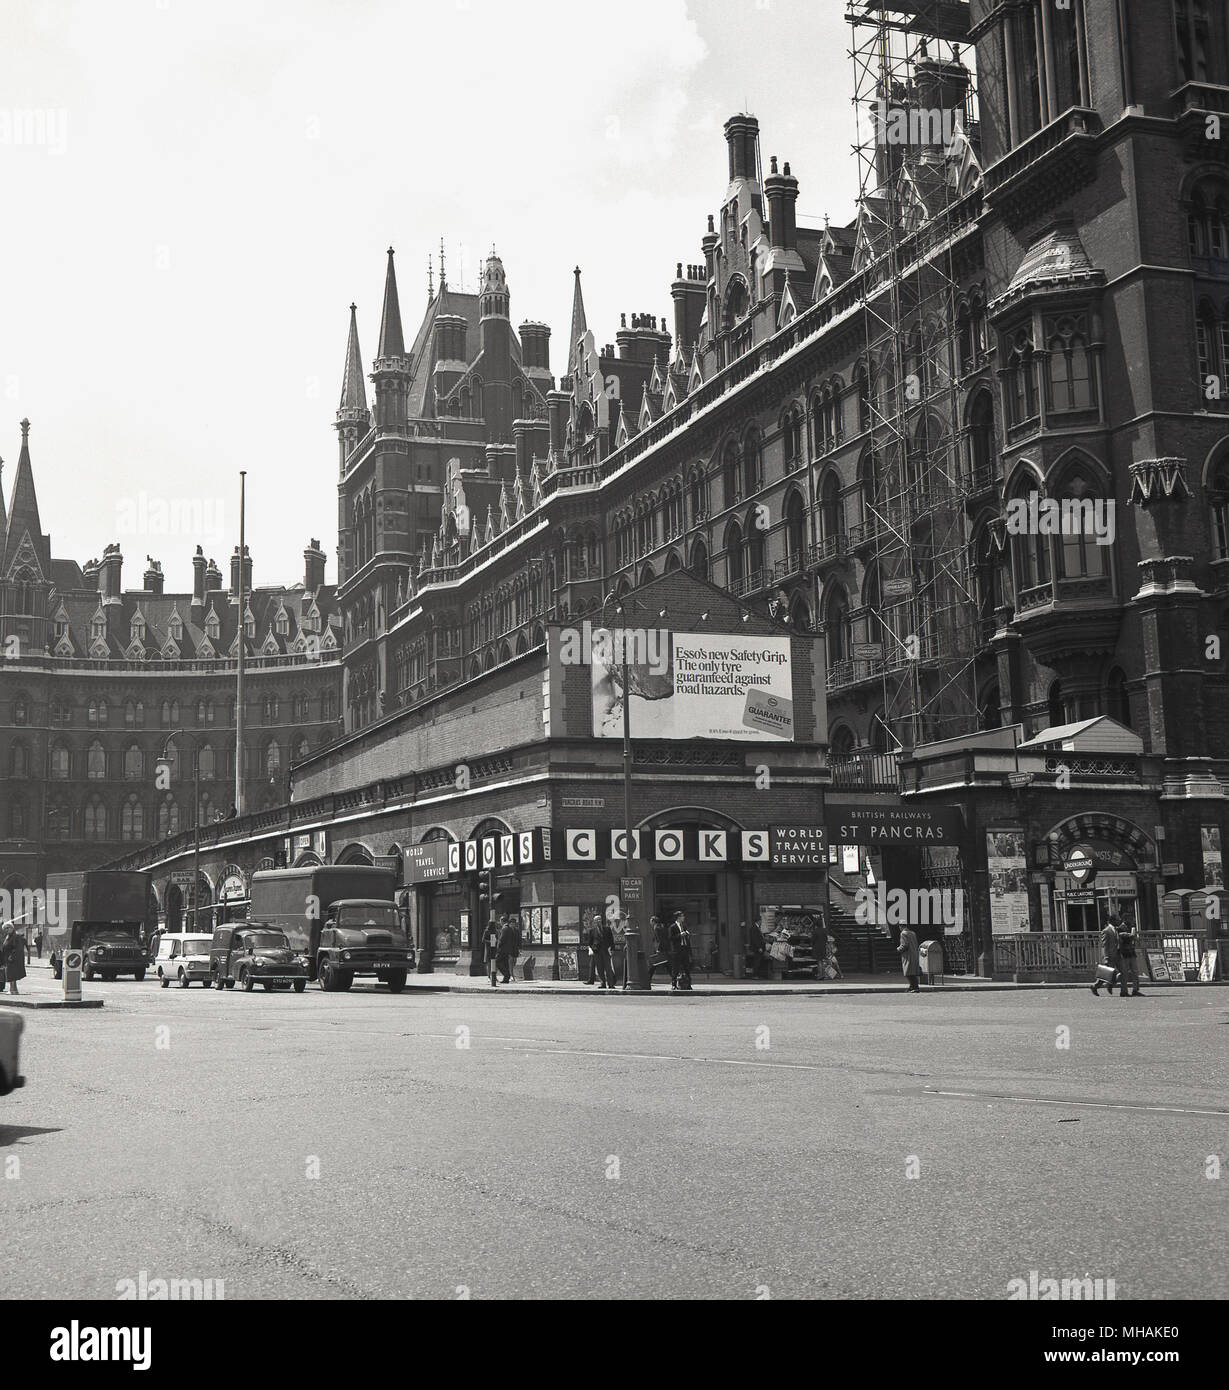 1958, historical, exterior view of St Pancras railway station and the former Midland Grand Hotel, Euston Rd, London, England, UK, designed in Victorian Gothic style by George Gilbert Scott. The hotel closed in 1935 and after surviving the blitz in WW2, in 1948 the building was occupied by British Rail and became the headquarters for their hotels and catering arm, British Transport Hotels (BTH). Stock Photo